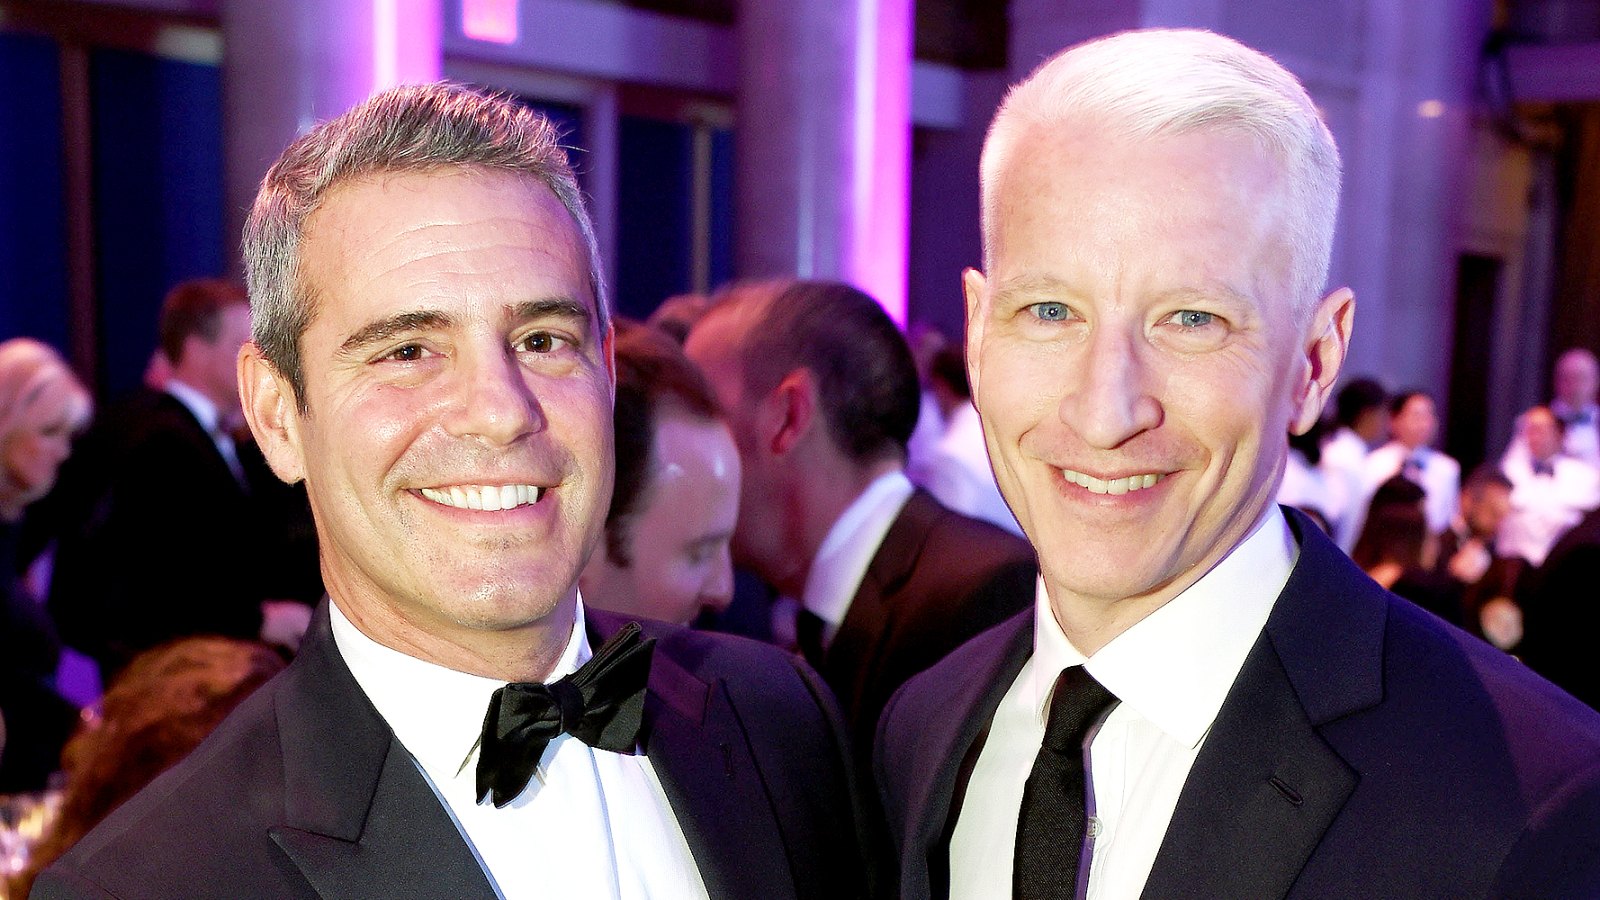 Andy Cohen and Anderson Cooper attend Elton John AIDS Foundation's 14th Annual An Enduring Vision Benefit at Cipriani Wall Street on November 2, 2015 in New York City.